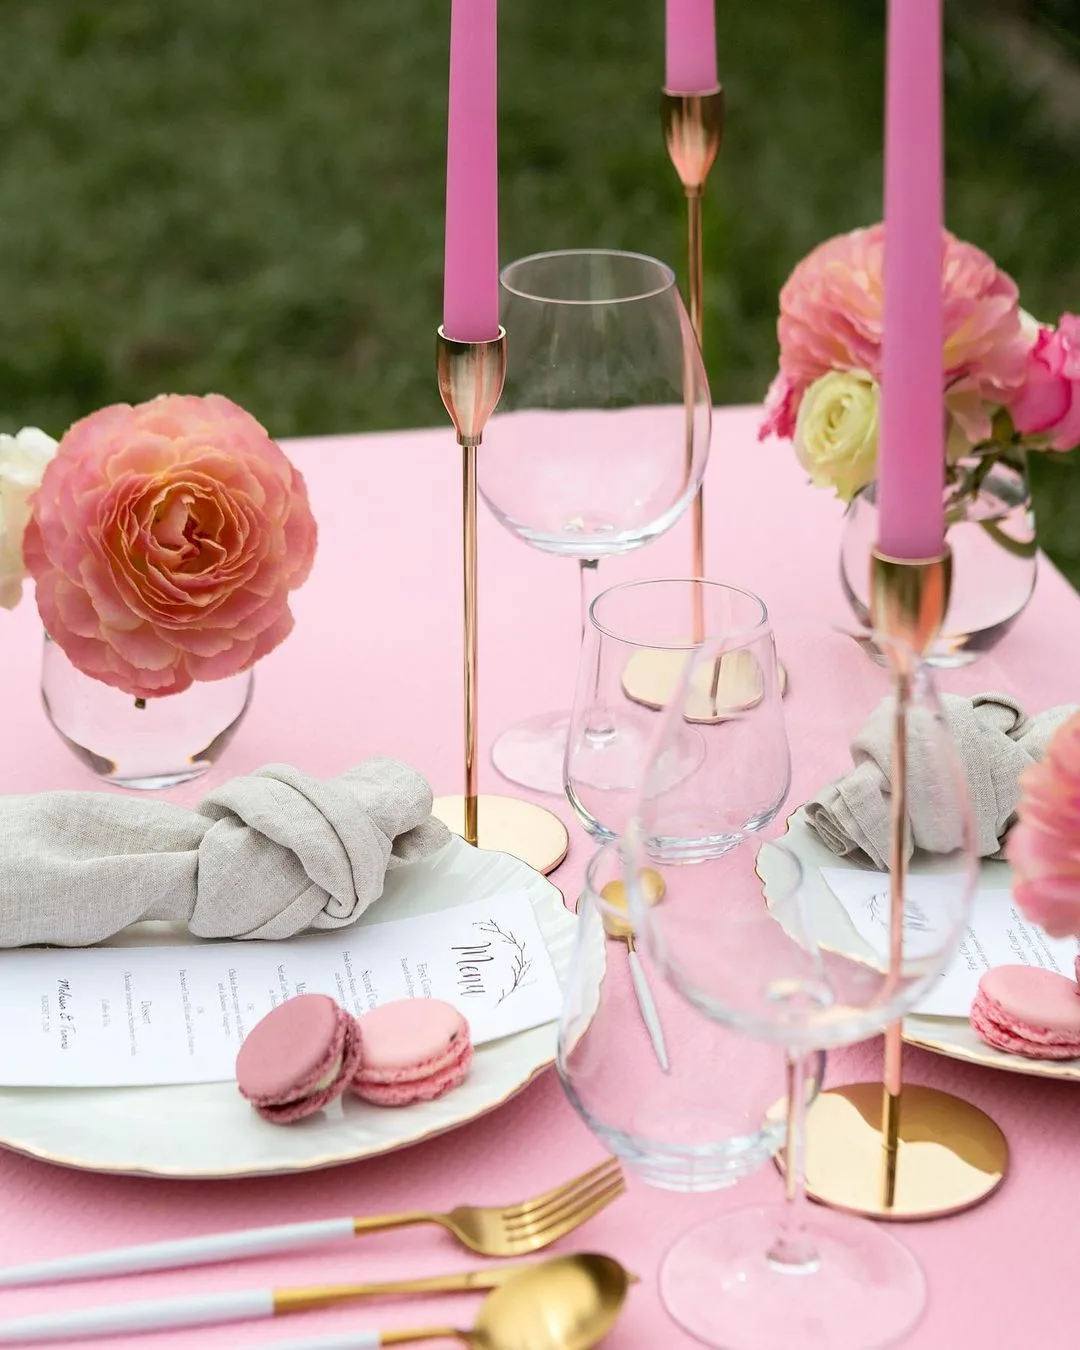 Pink Flowers, Pink Candles, And Pink Macarons